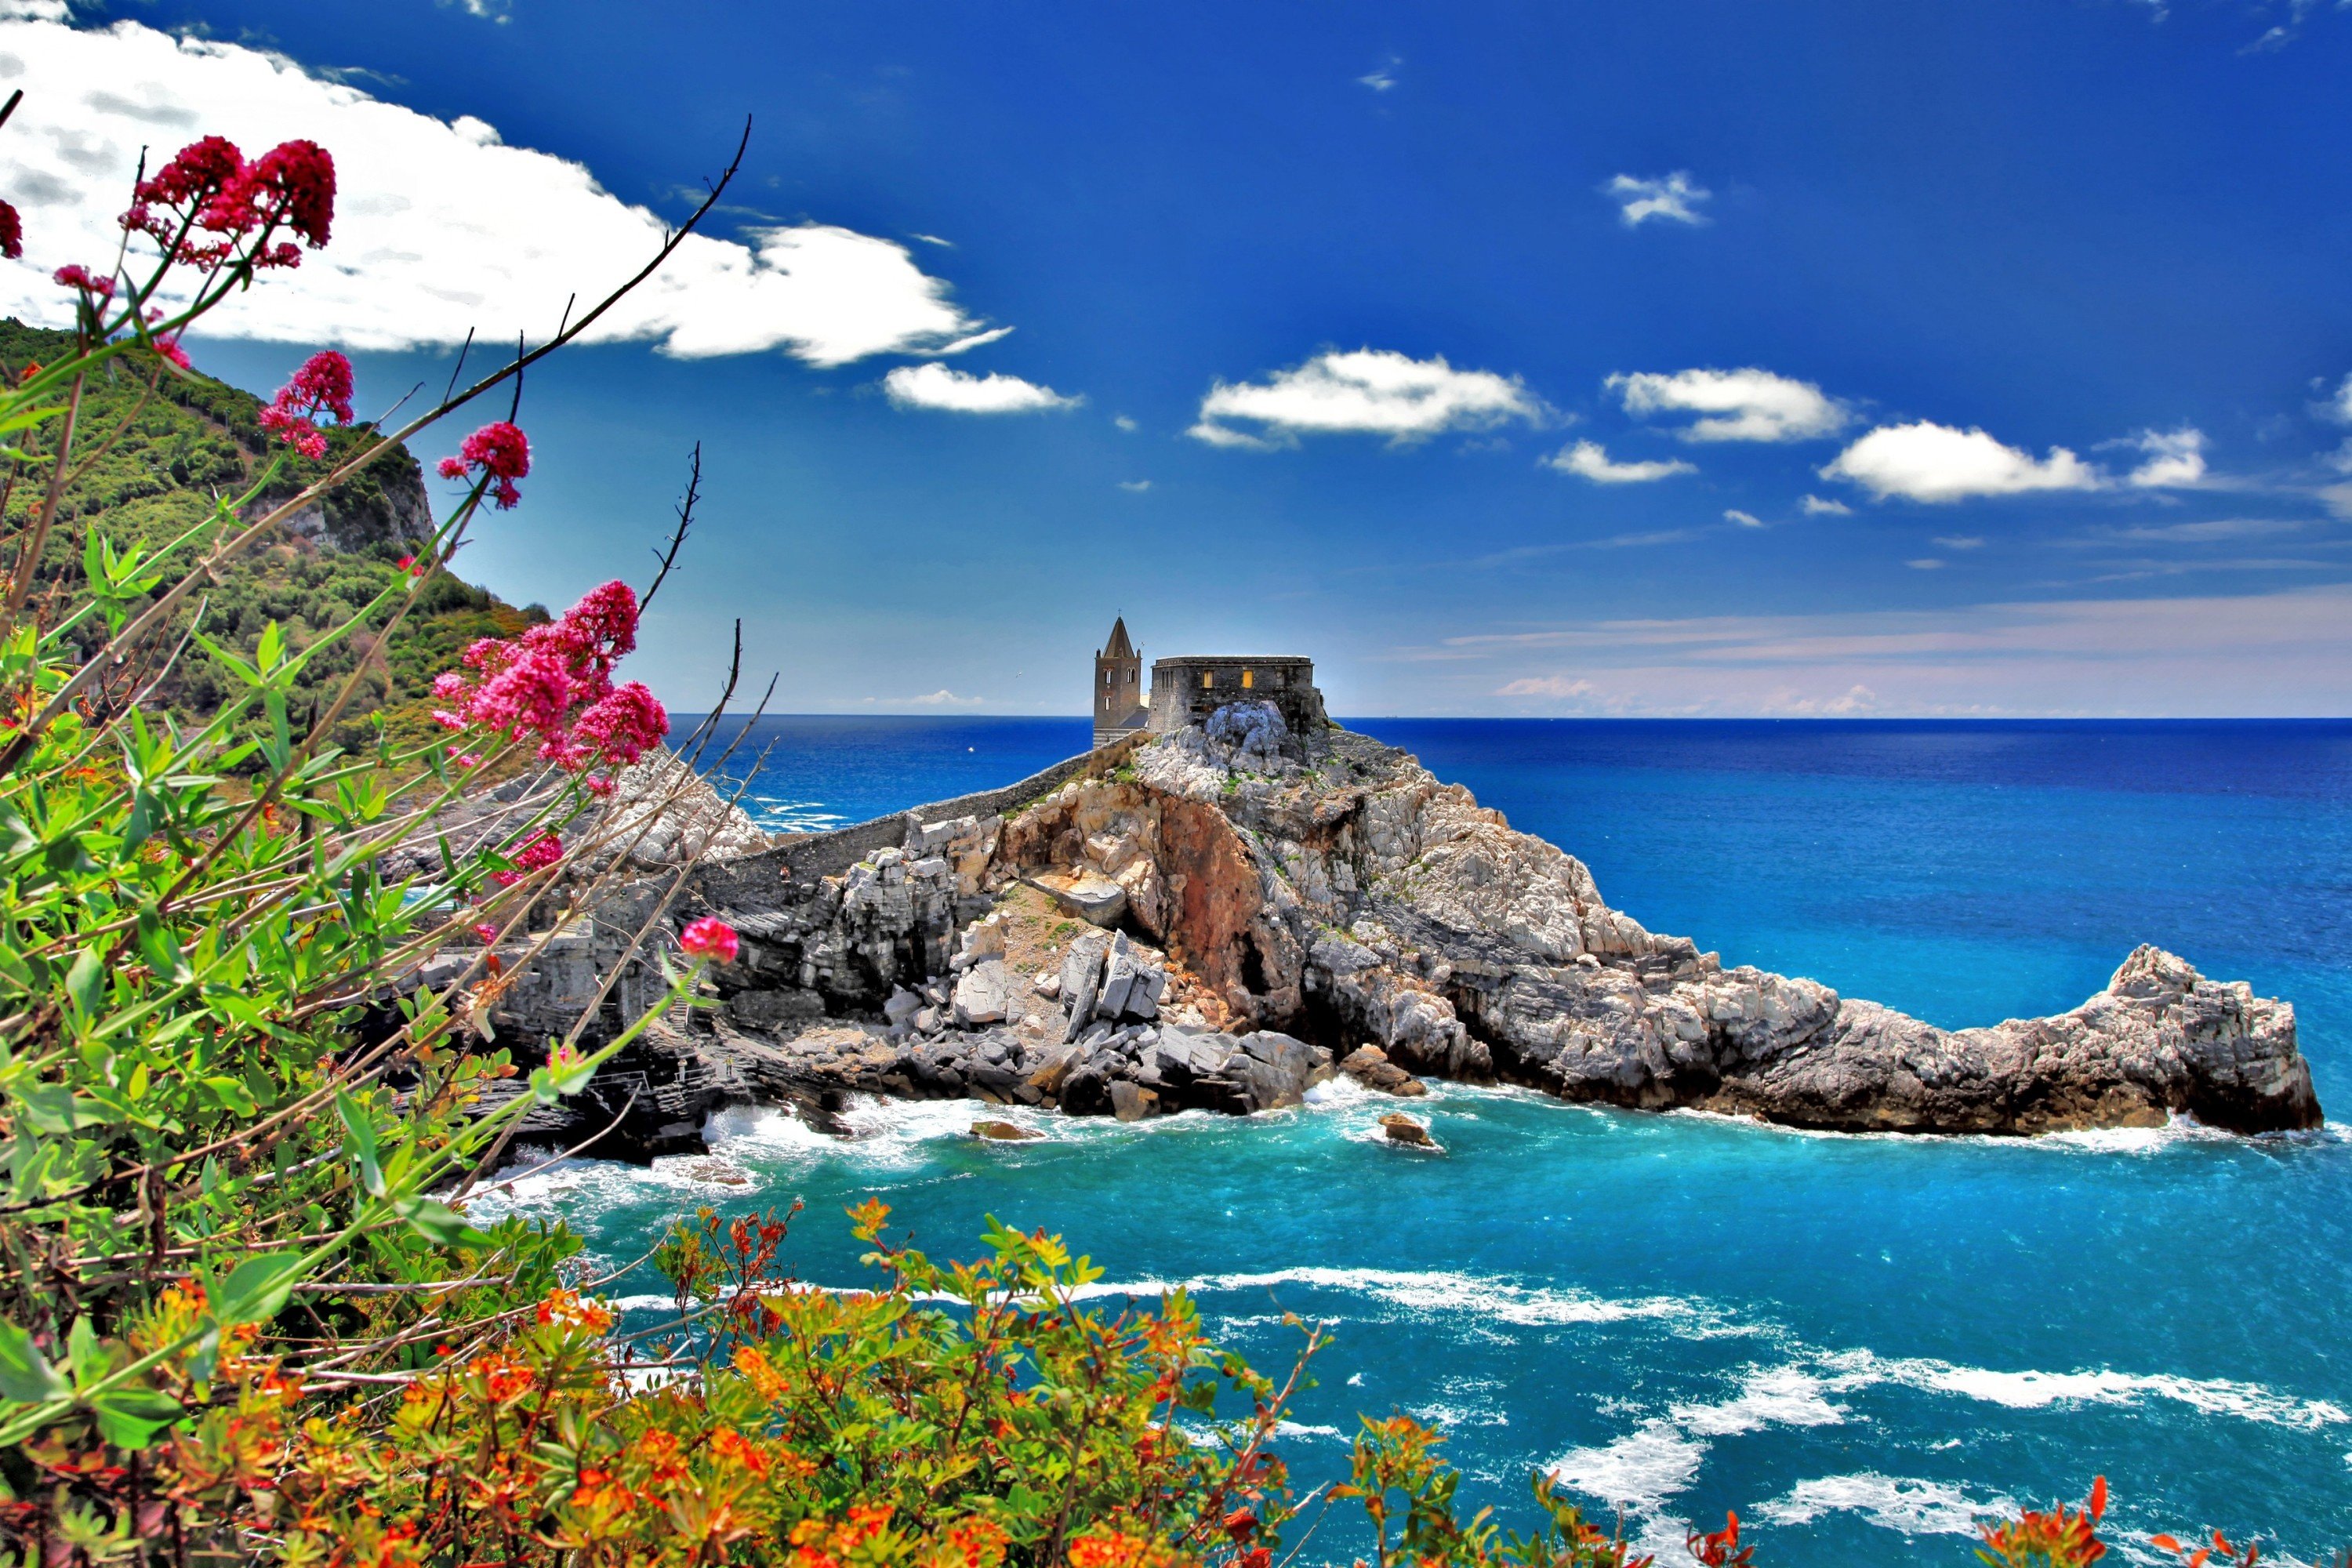 cinque, Terre, Tower, Italy, Sky, Clouds, Nature, Sea, Rocks, Italy, House, Town, Flowers Wallpaper